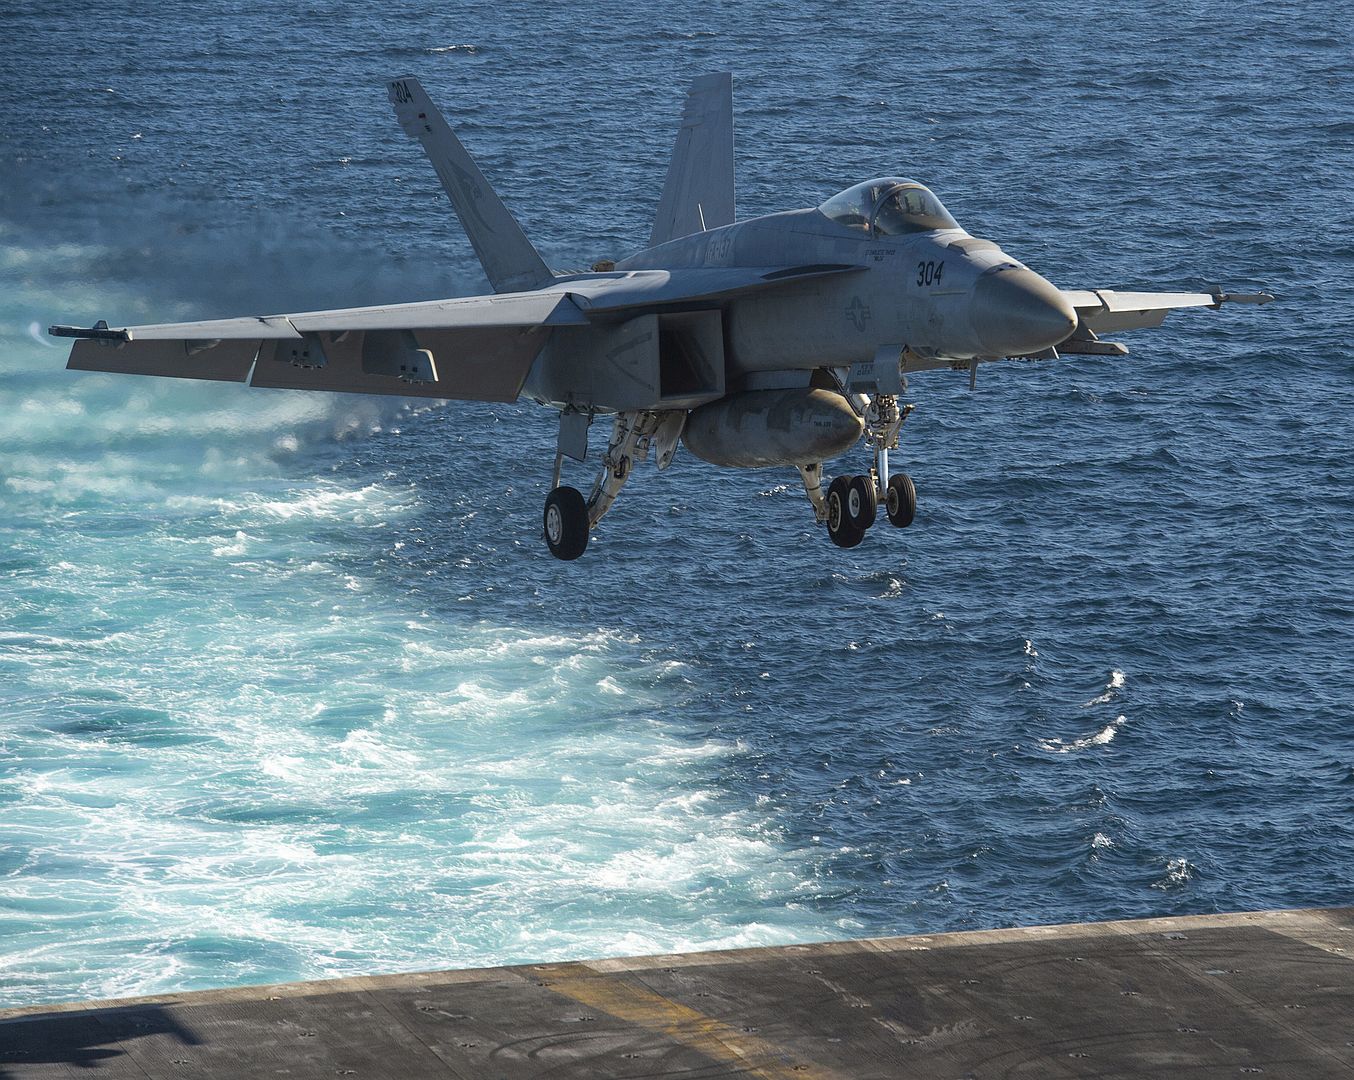 FA 18E Super Hornet From The Kestrels Of Strike Fighter Squadron VFA 137 Approaches The Flight Deck Of The Aircraft Carrier USS Nimitz